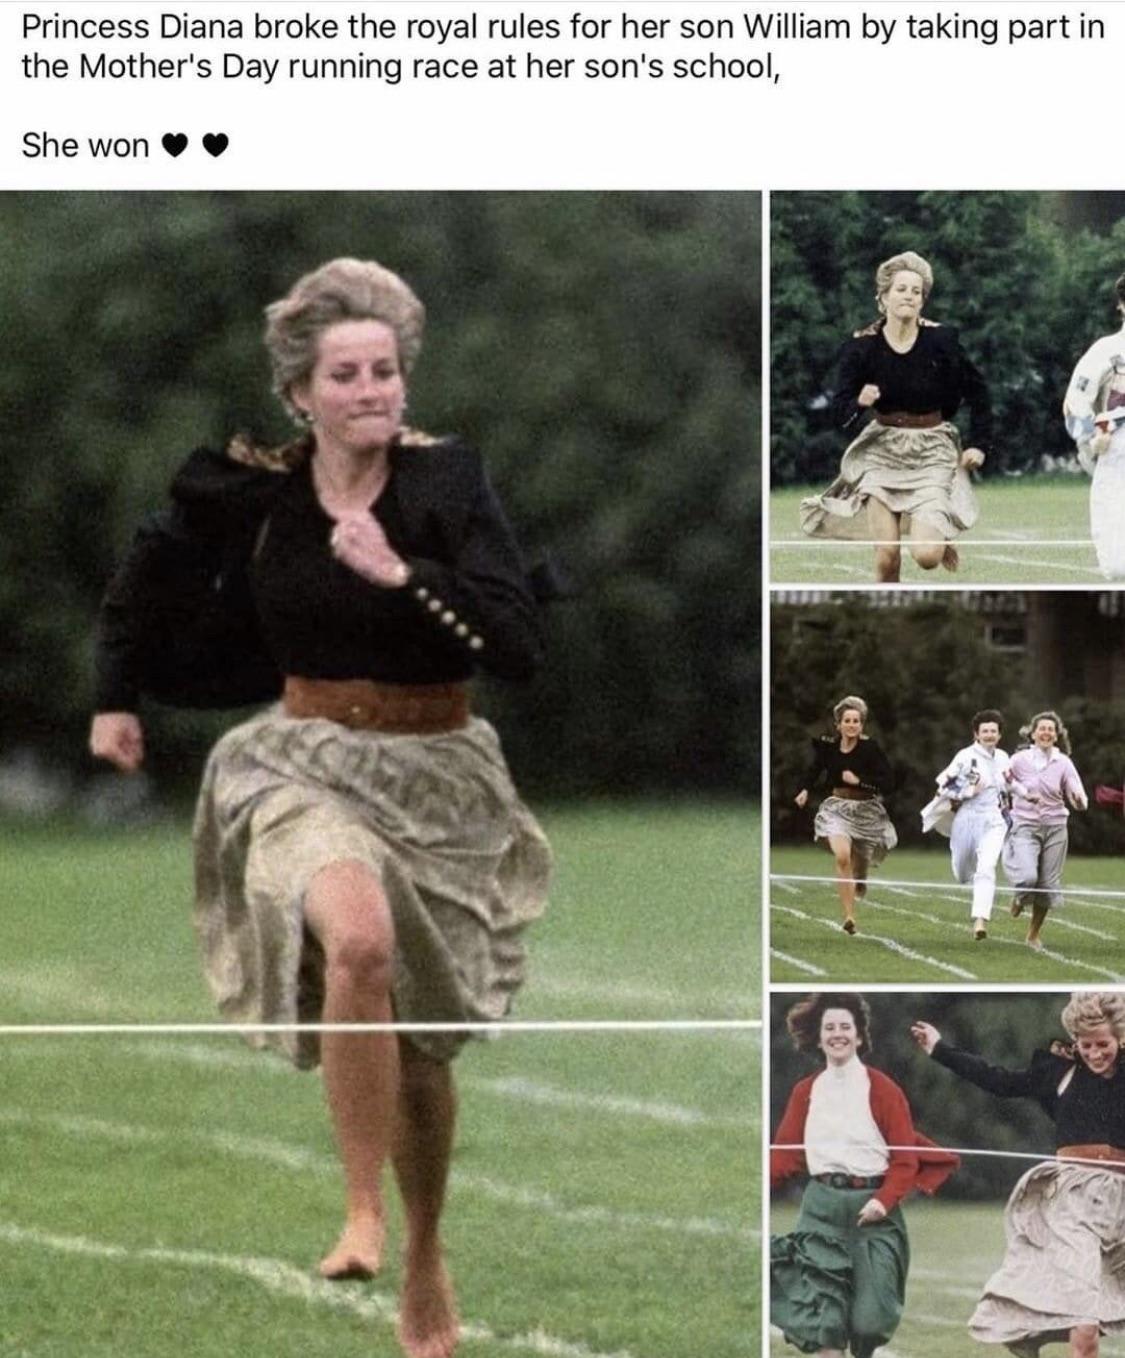 Princess Diana being awesome